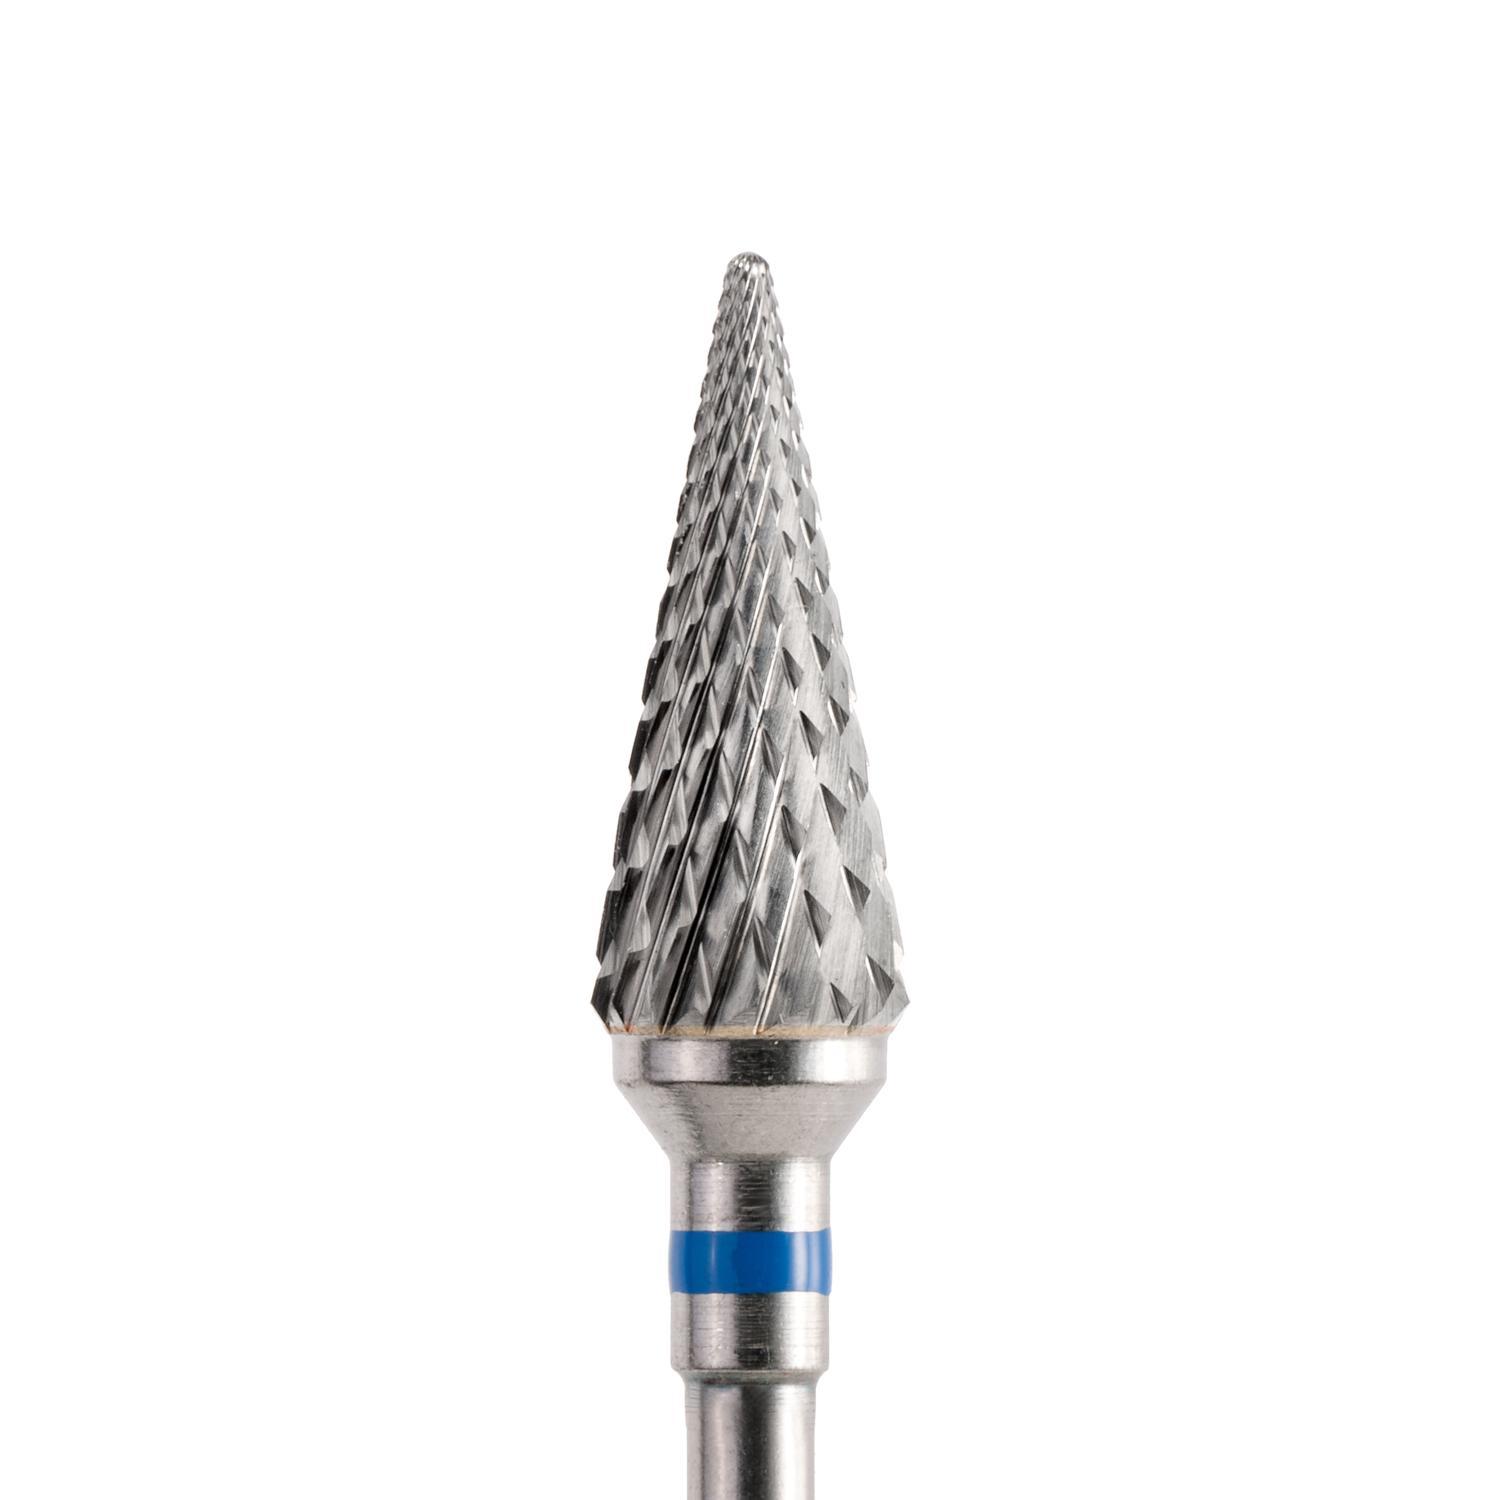 Acurata professional milling tool with moderate cross cut AC-67 ACURATA - 190 Series - Gel Removal